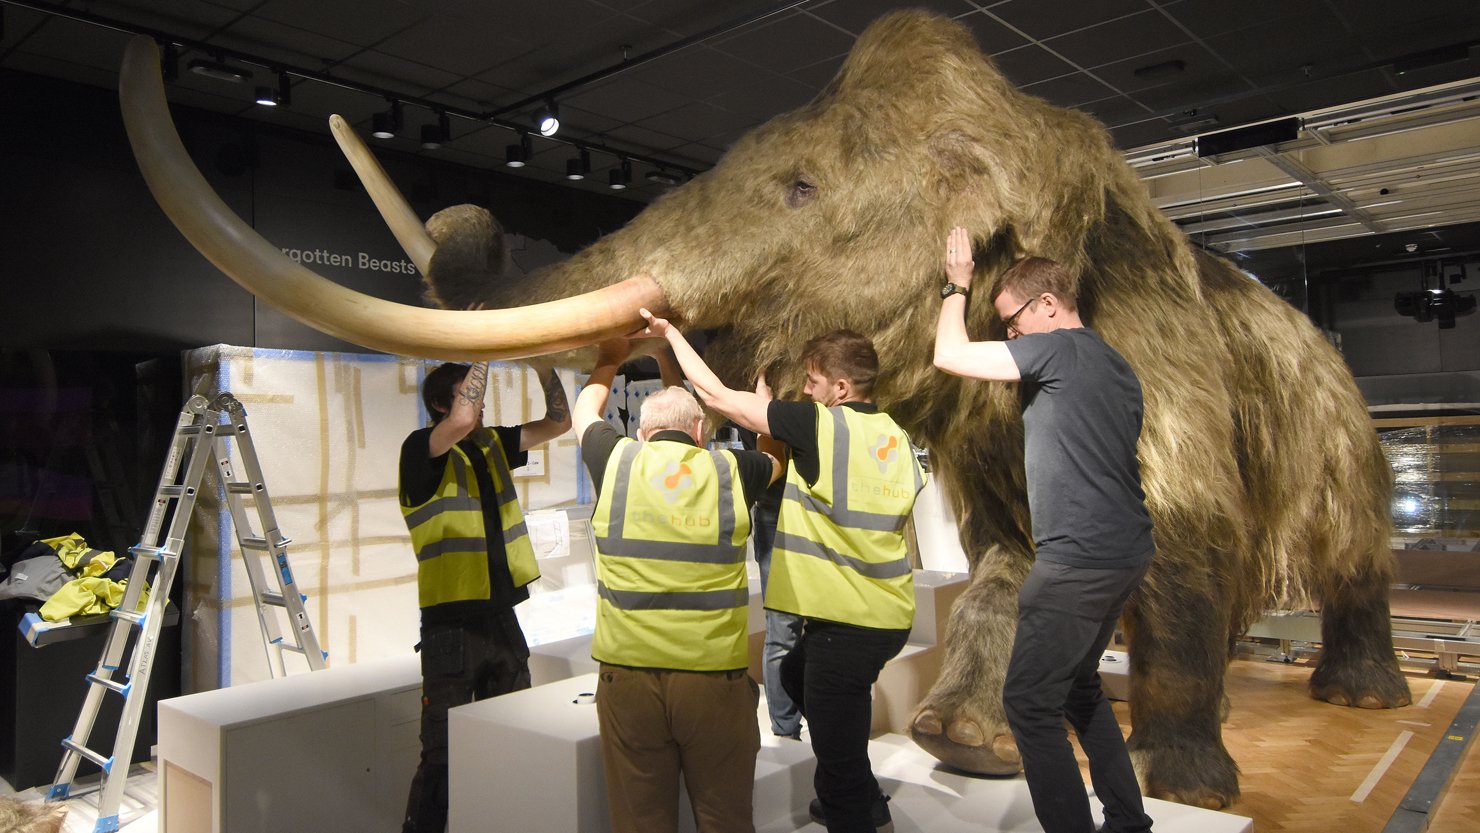 A replica woolly mammoth being moved into place by a team of people in a gallery